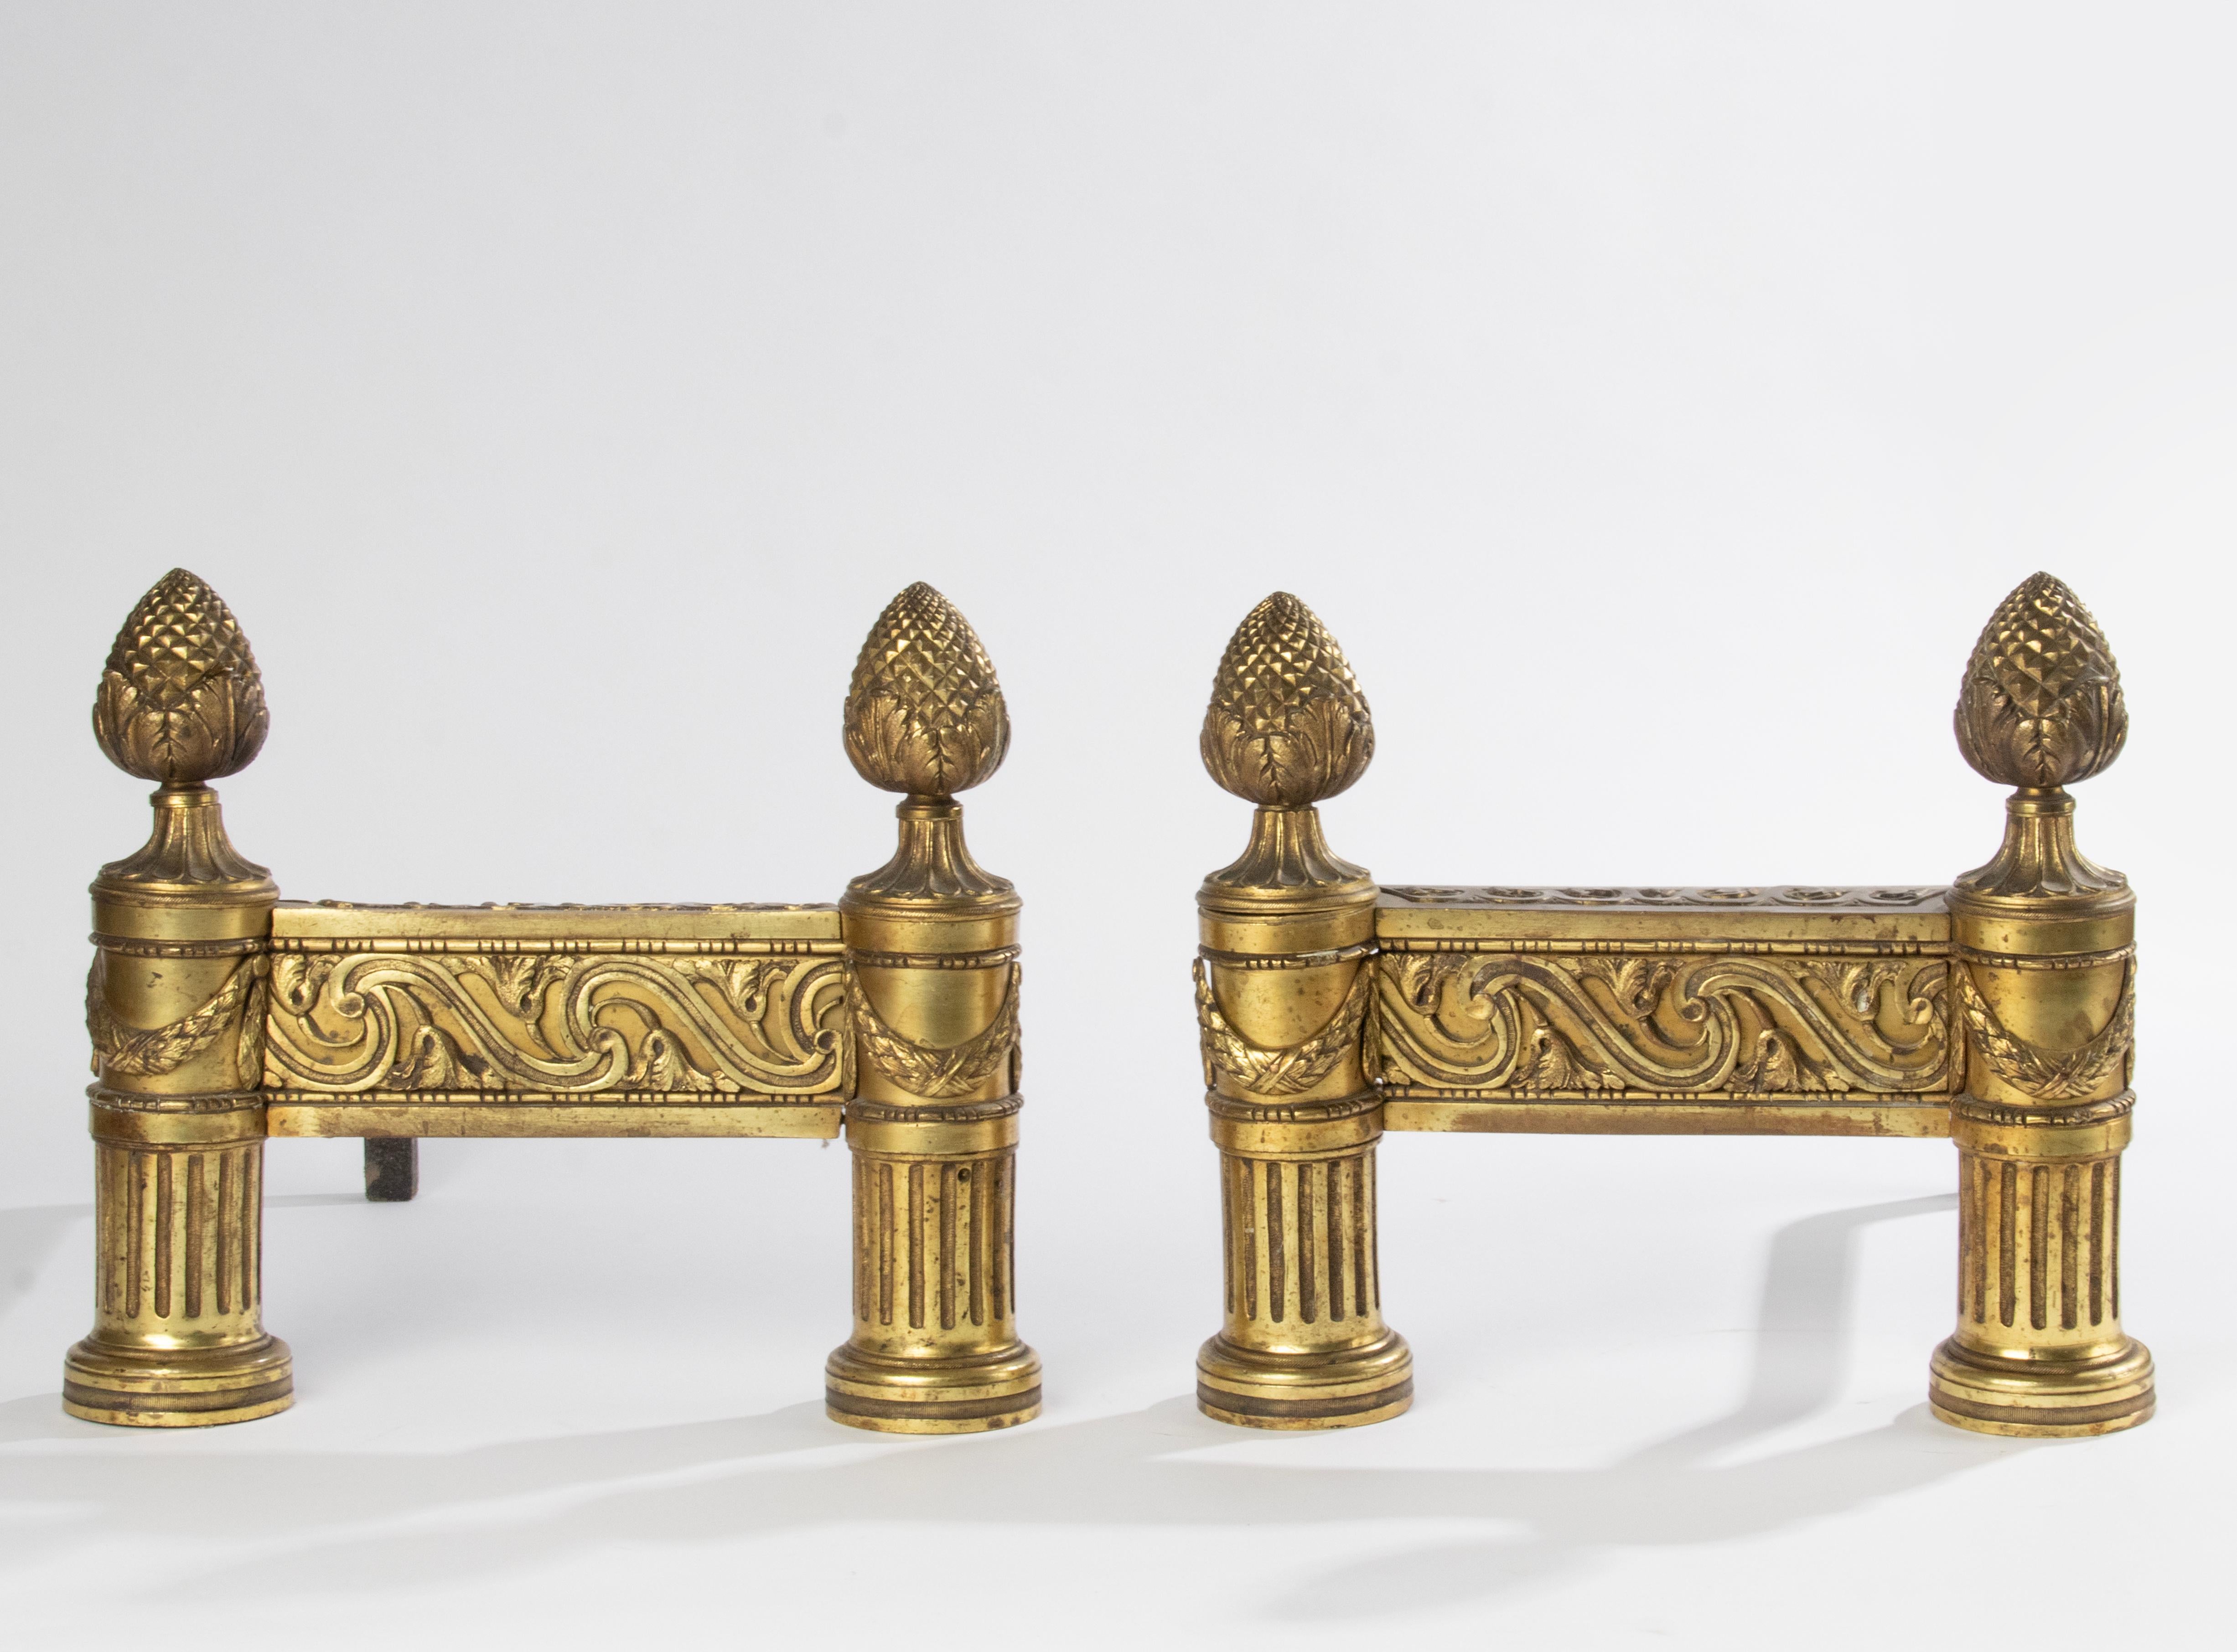 A pair of late 19th century French andirons, in France called ‘Chenets’. Richley decorated with scrolls on the front fries. Standing on fluting columns with a flower garland and with pine cone endings. The back rests are made of forged iron, these